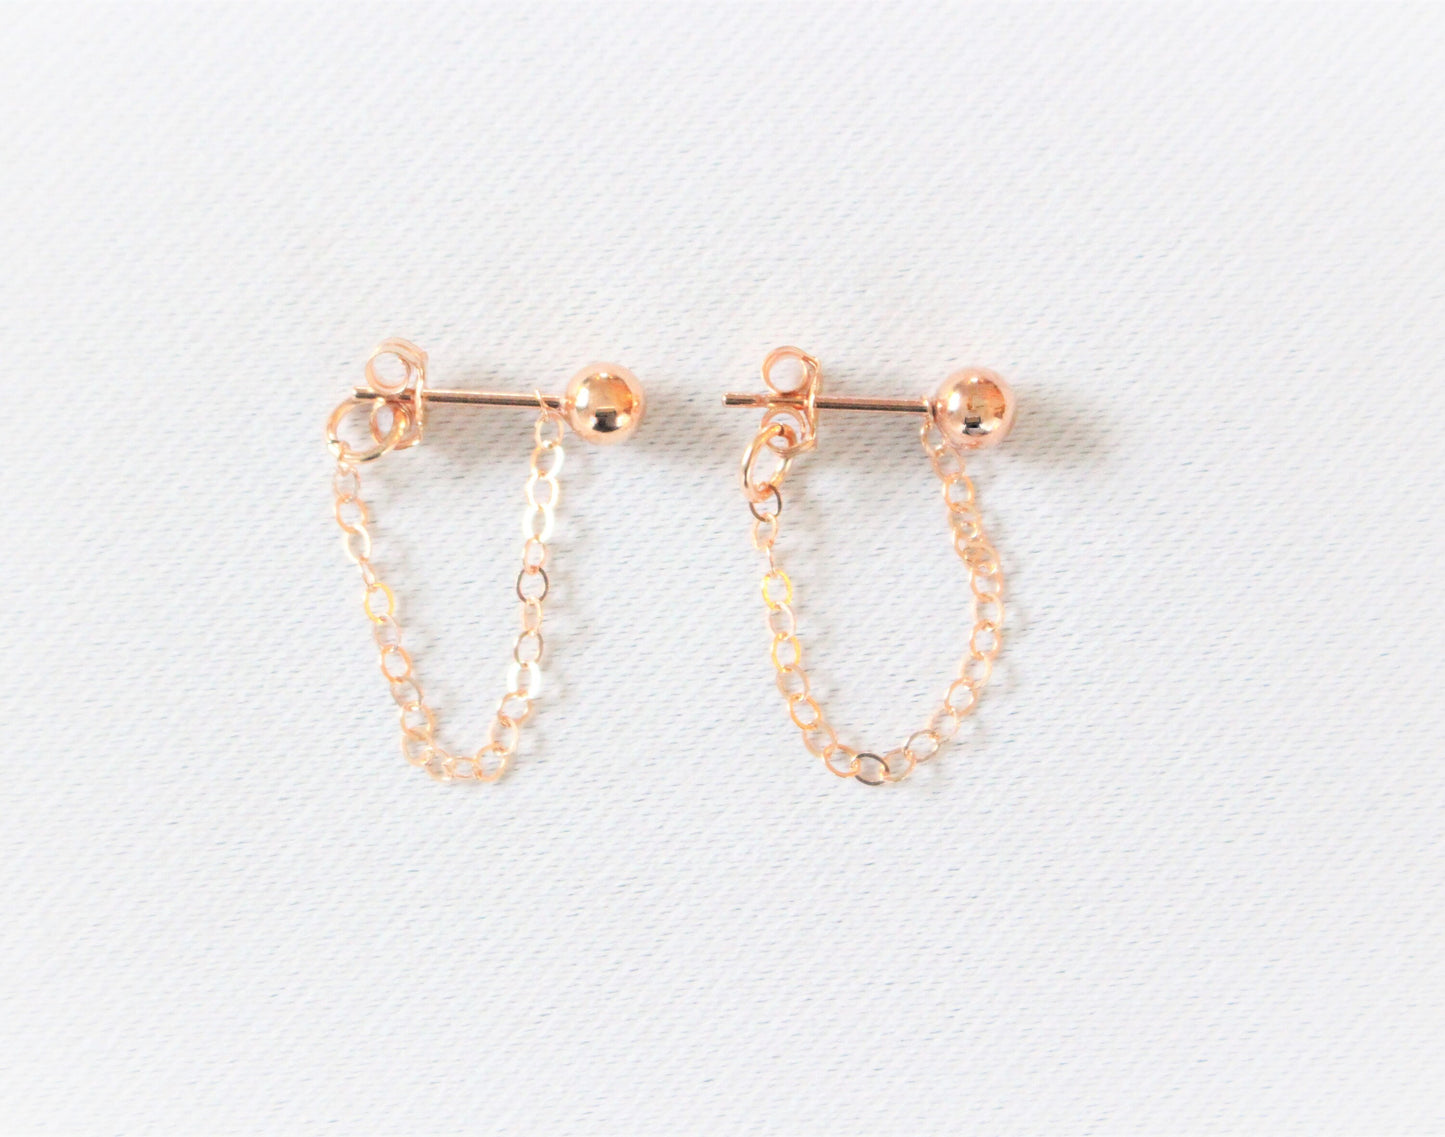 14K Rose gold filled earrings,  Front back chain on studs